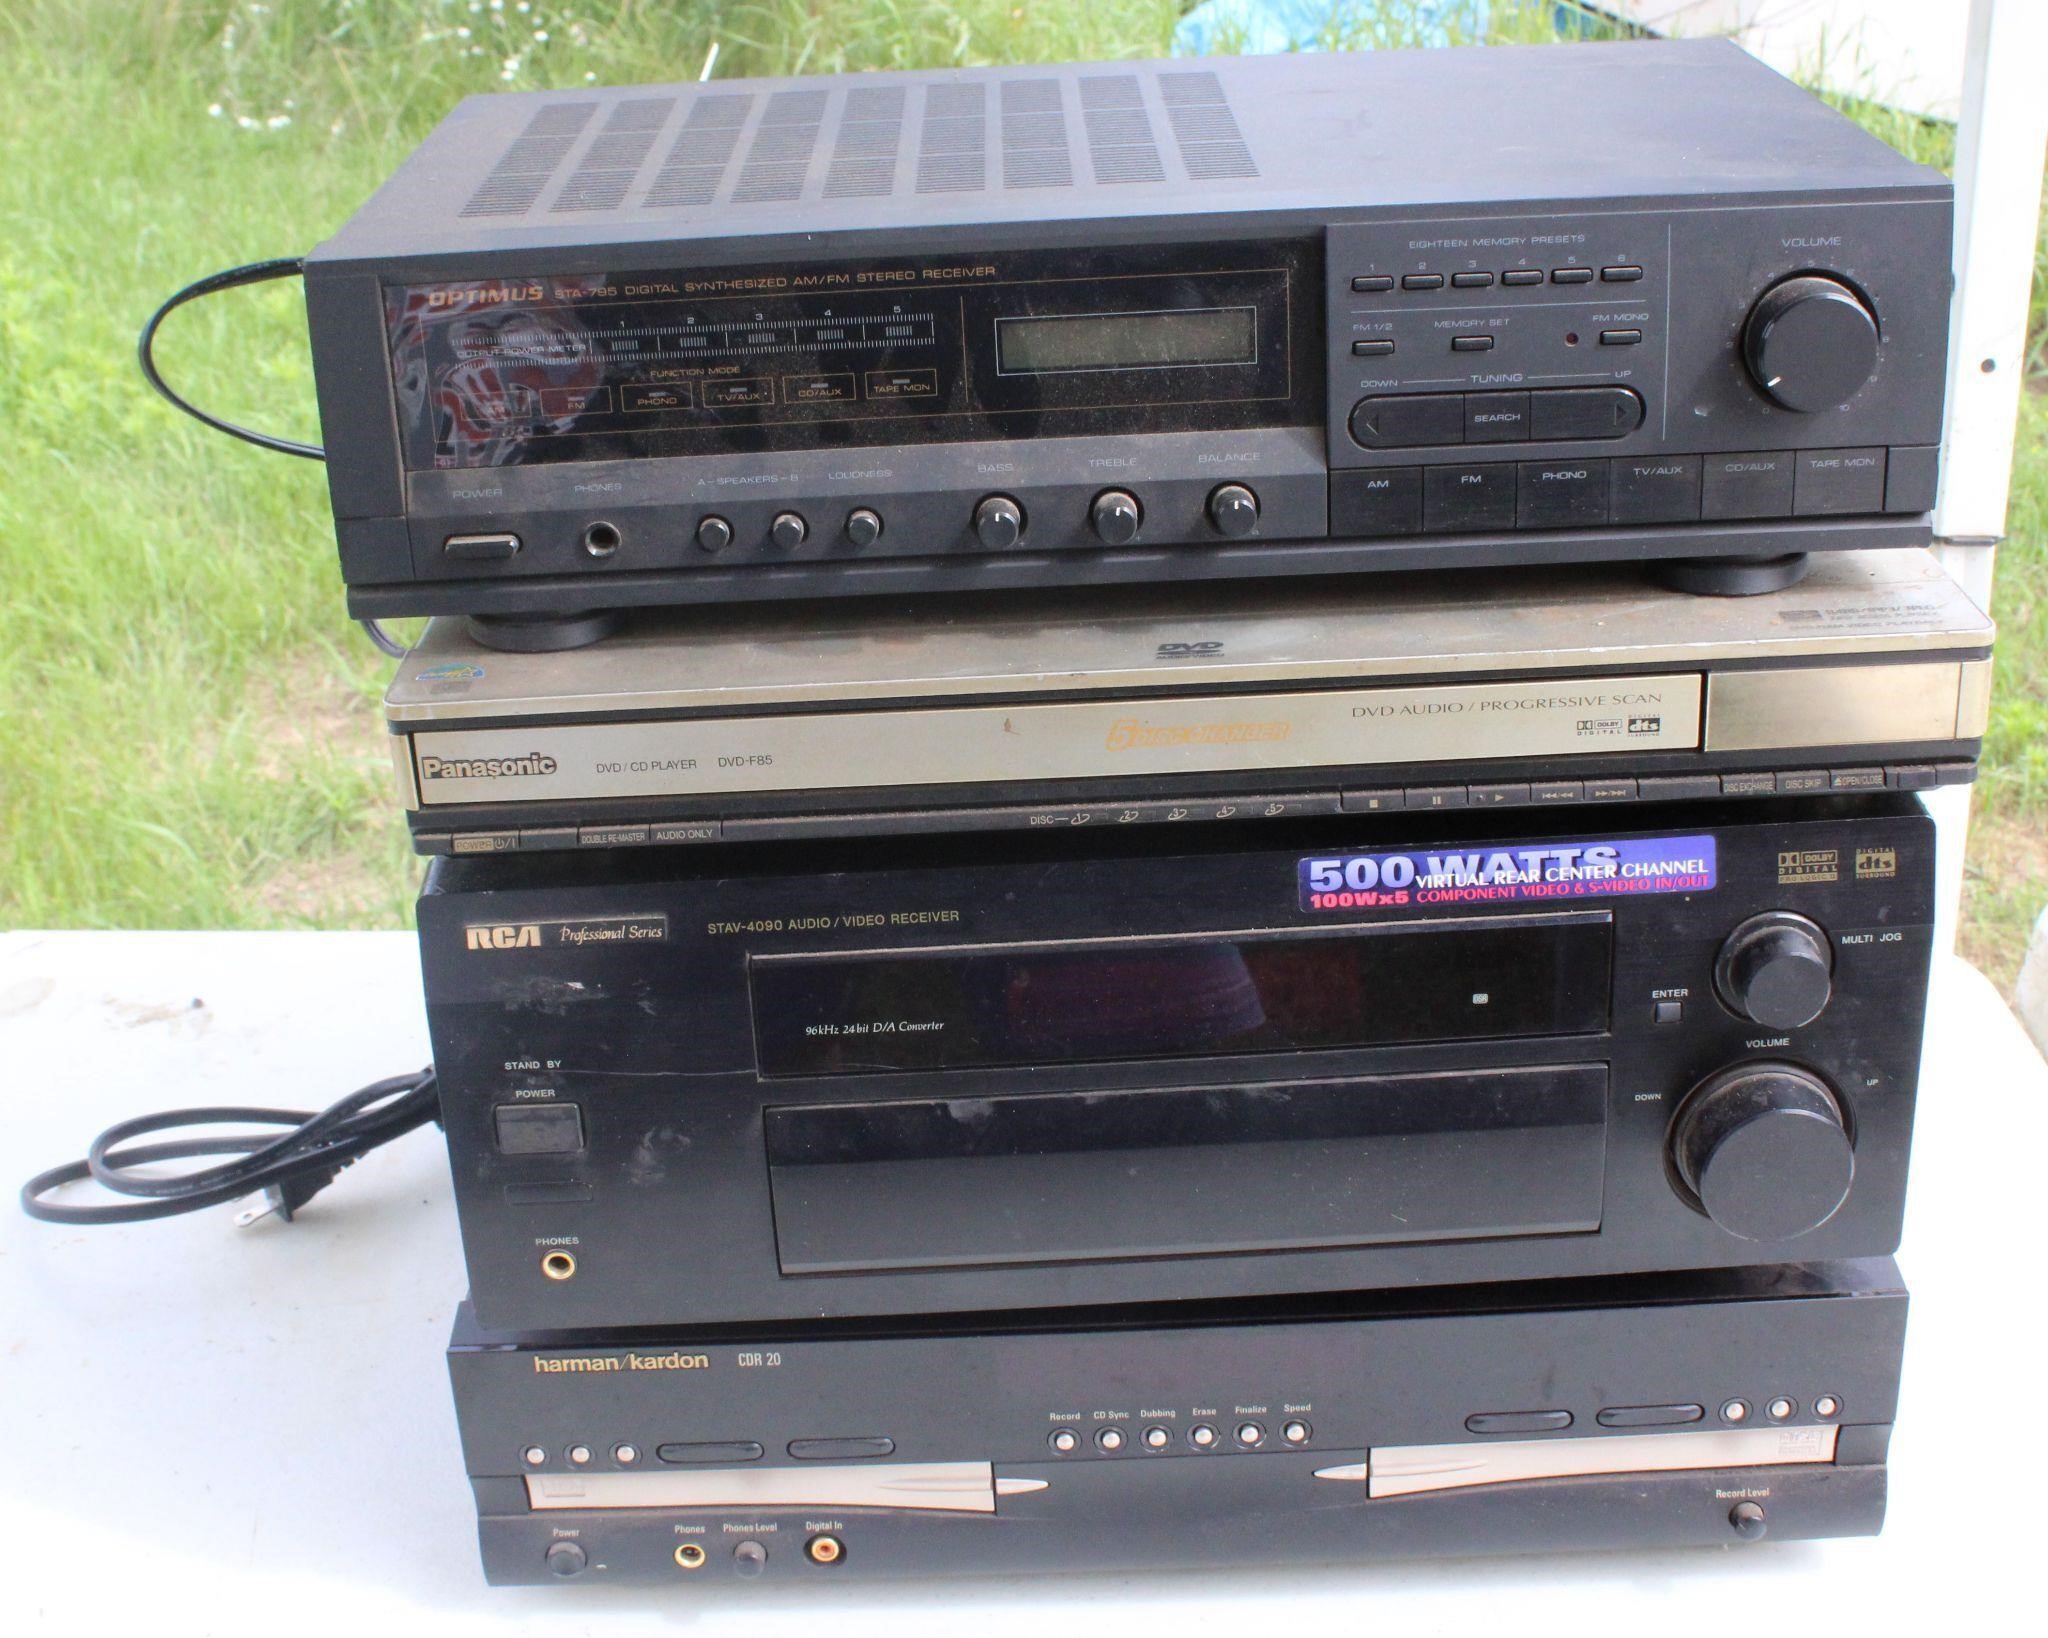 4 pcs of Miscellaneous Stereo Equipment